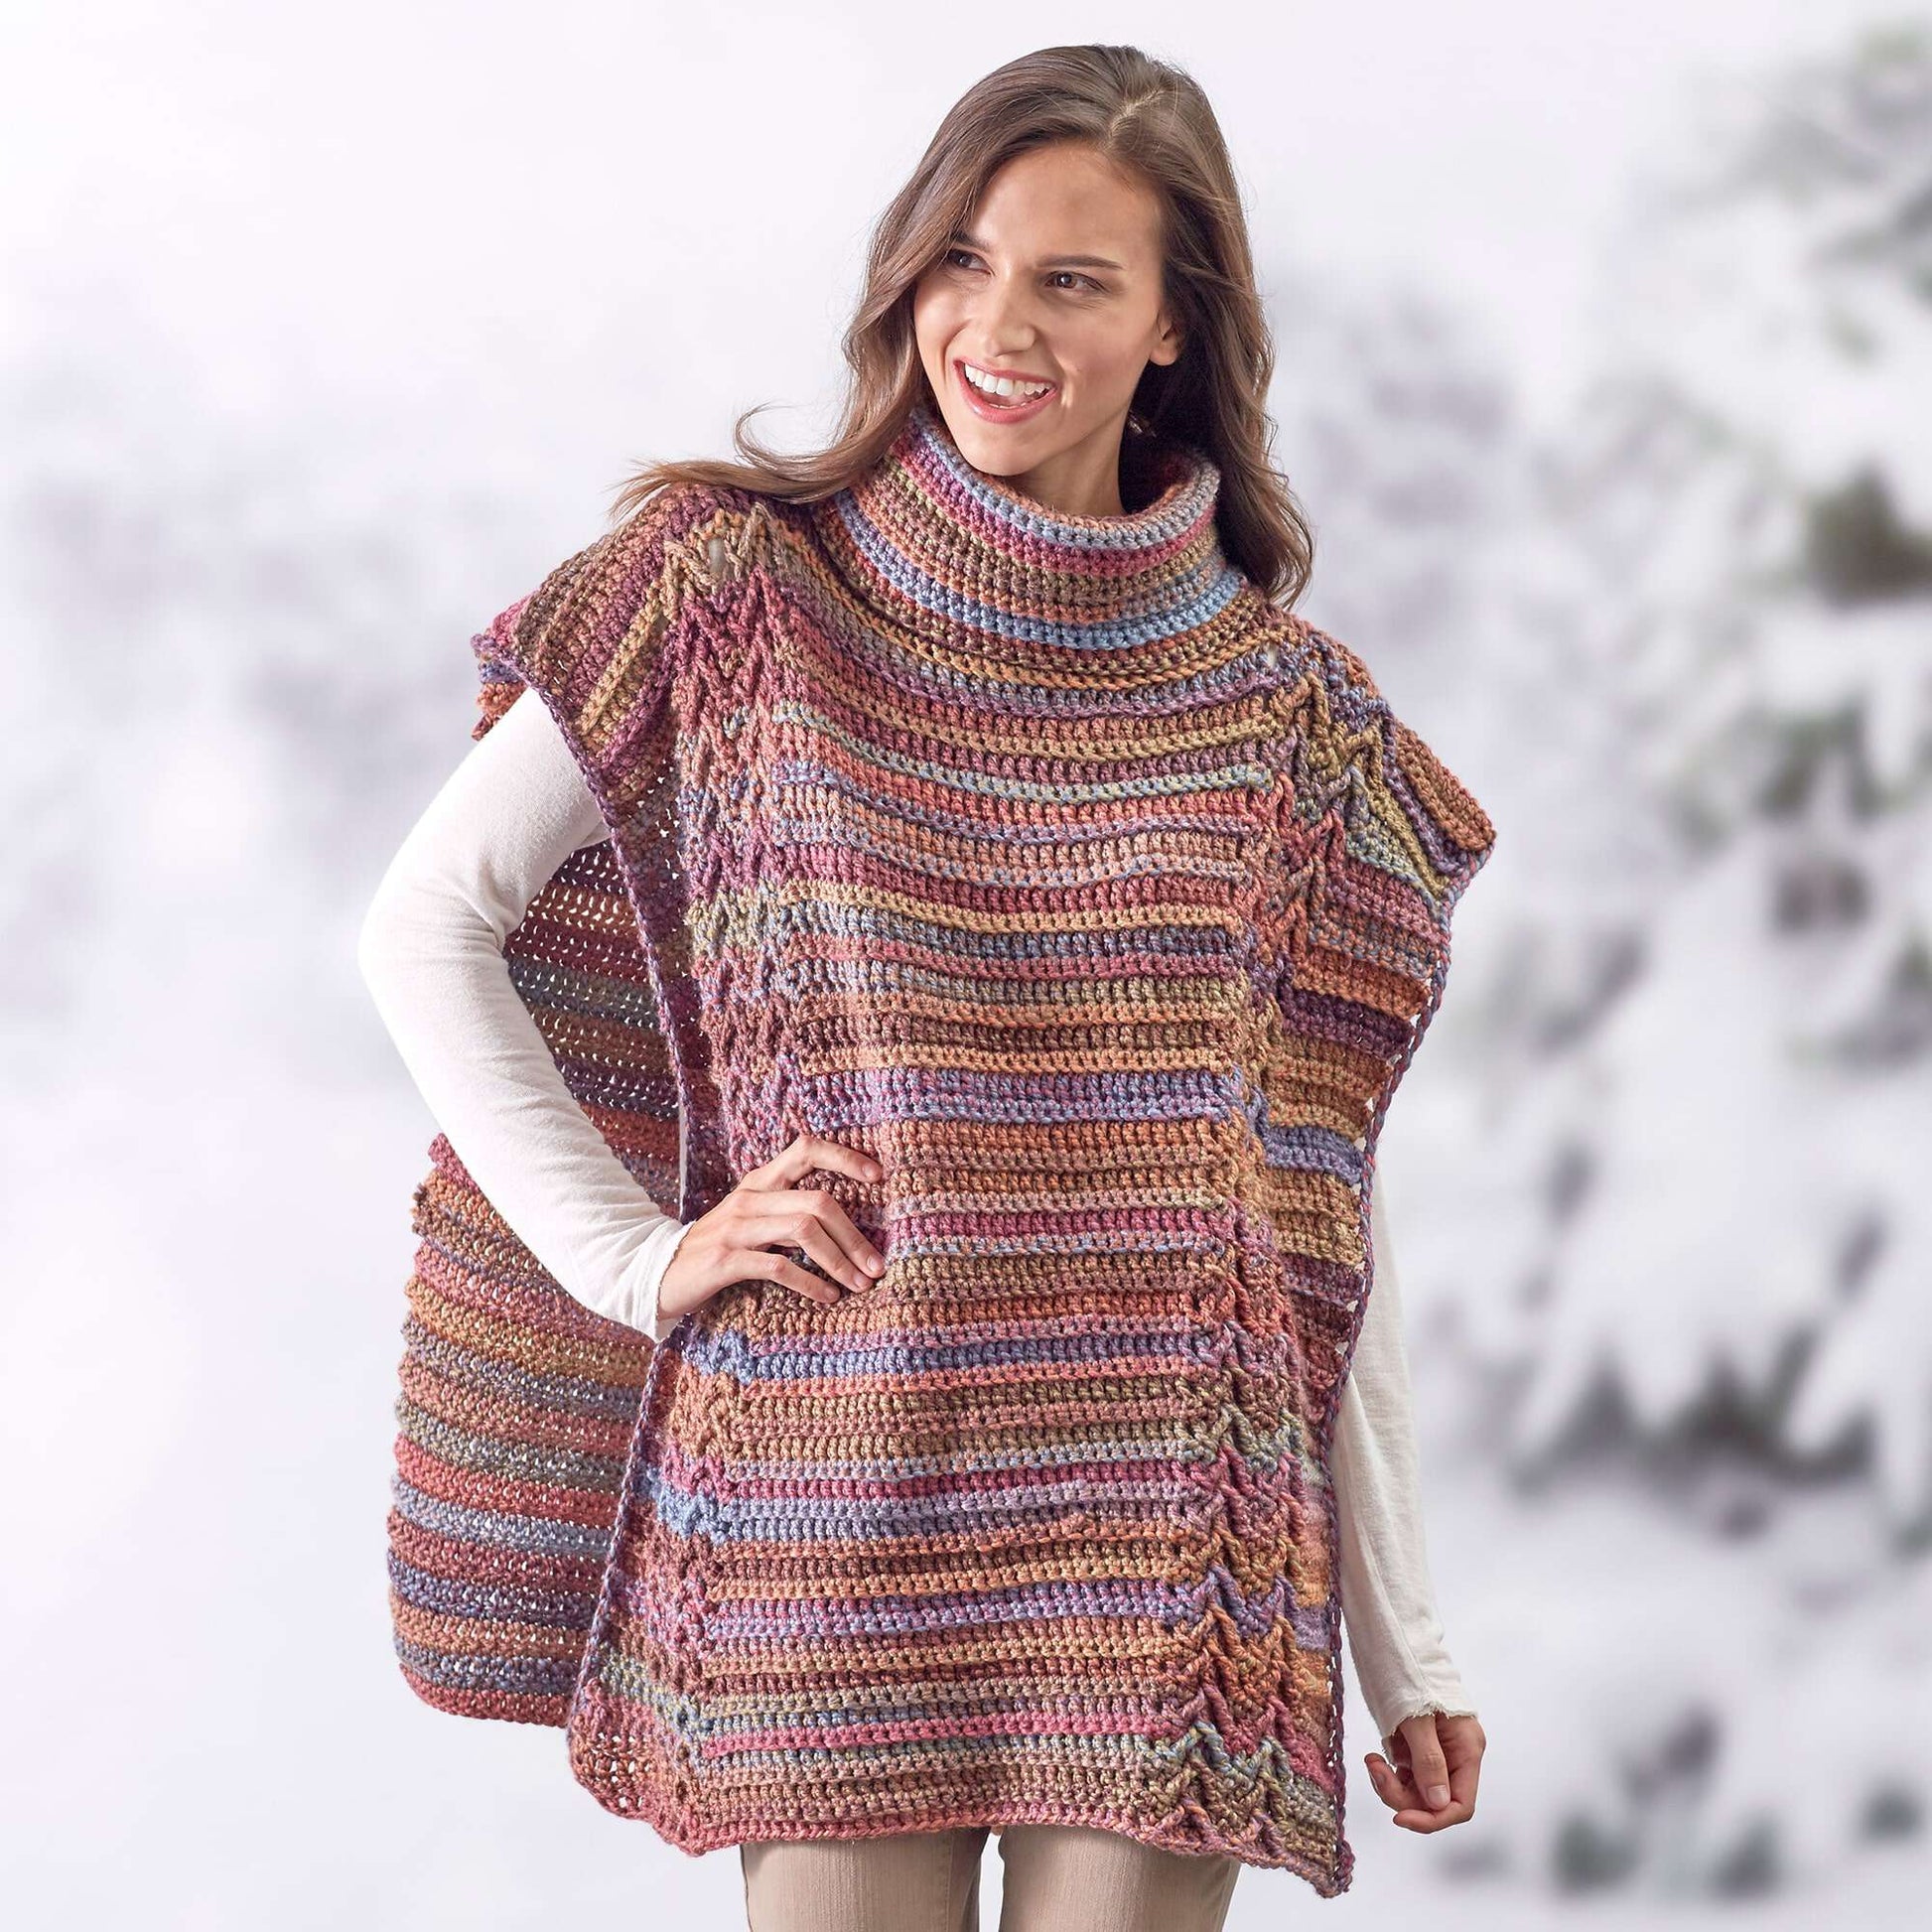 Free Red Heart Cabled Crochet Poncho Pattern